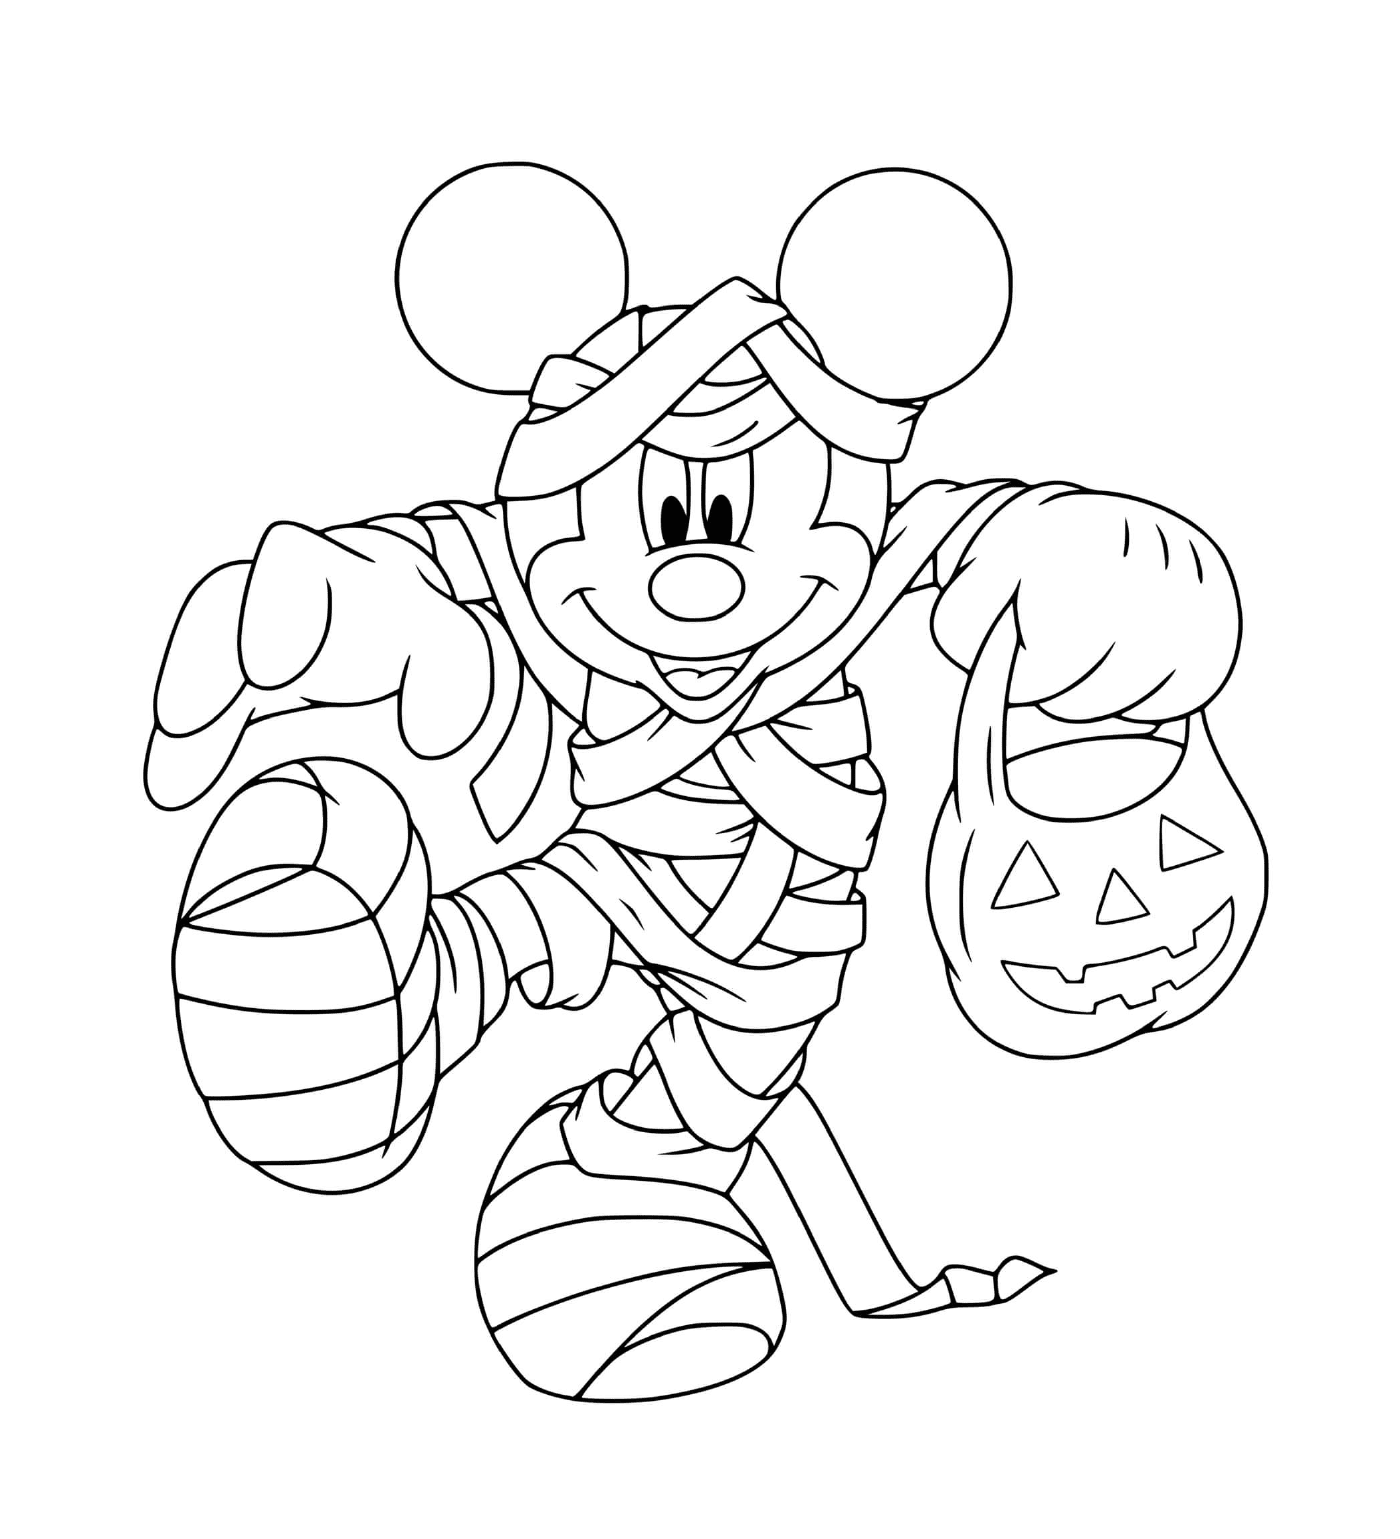  Mickey Mouse in scary costume 